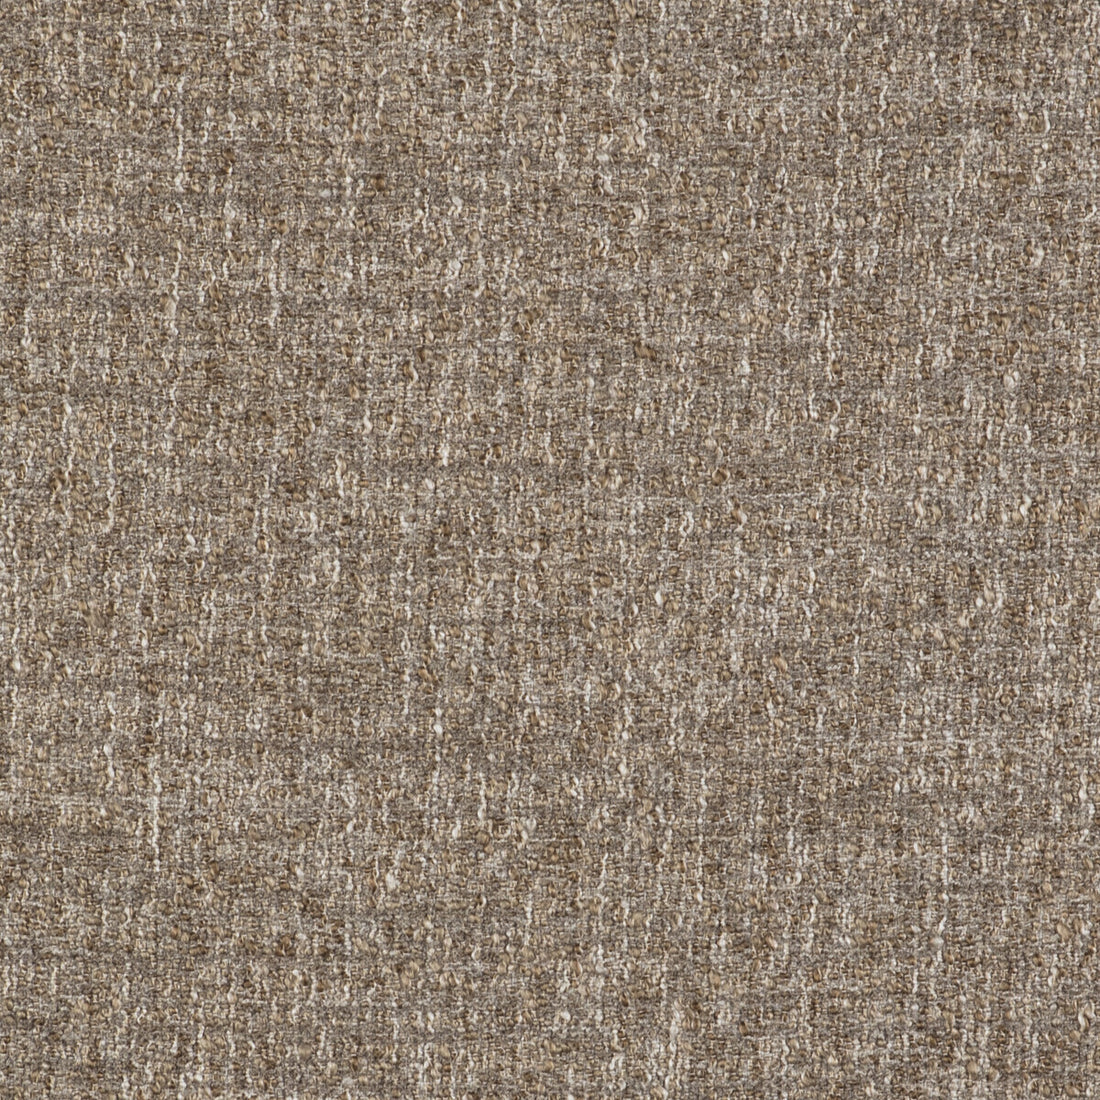 Telar fabric in beige color - pattern GDT5499.002.0 - by Gaston y Daniela in the Gaston Libreria collection